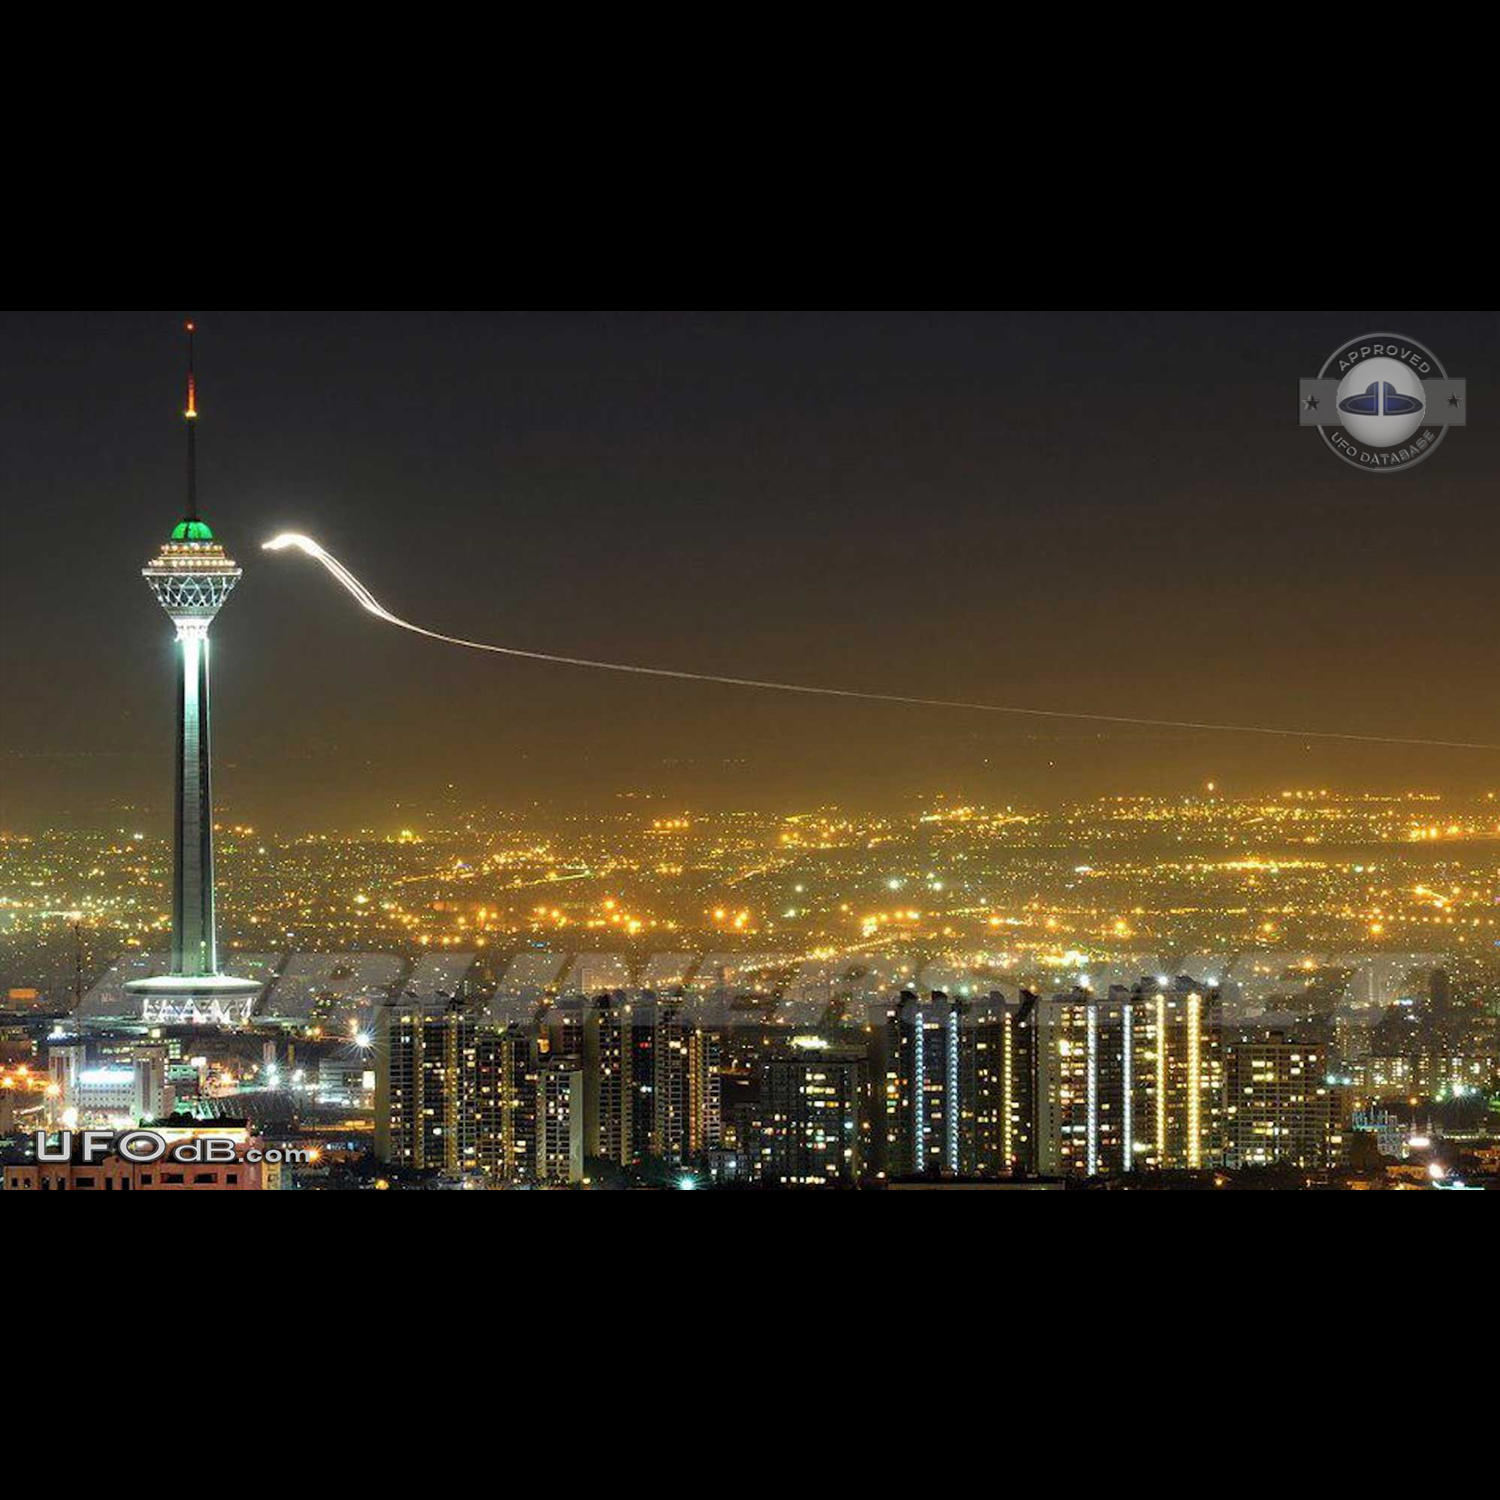 Glowing UFO with long trail near Milad Tower, Tehran, Iran 2012 UFO Picture #437-1